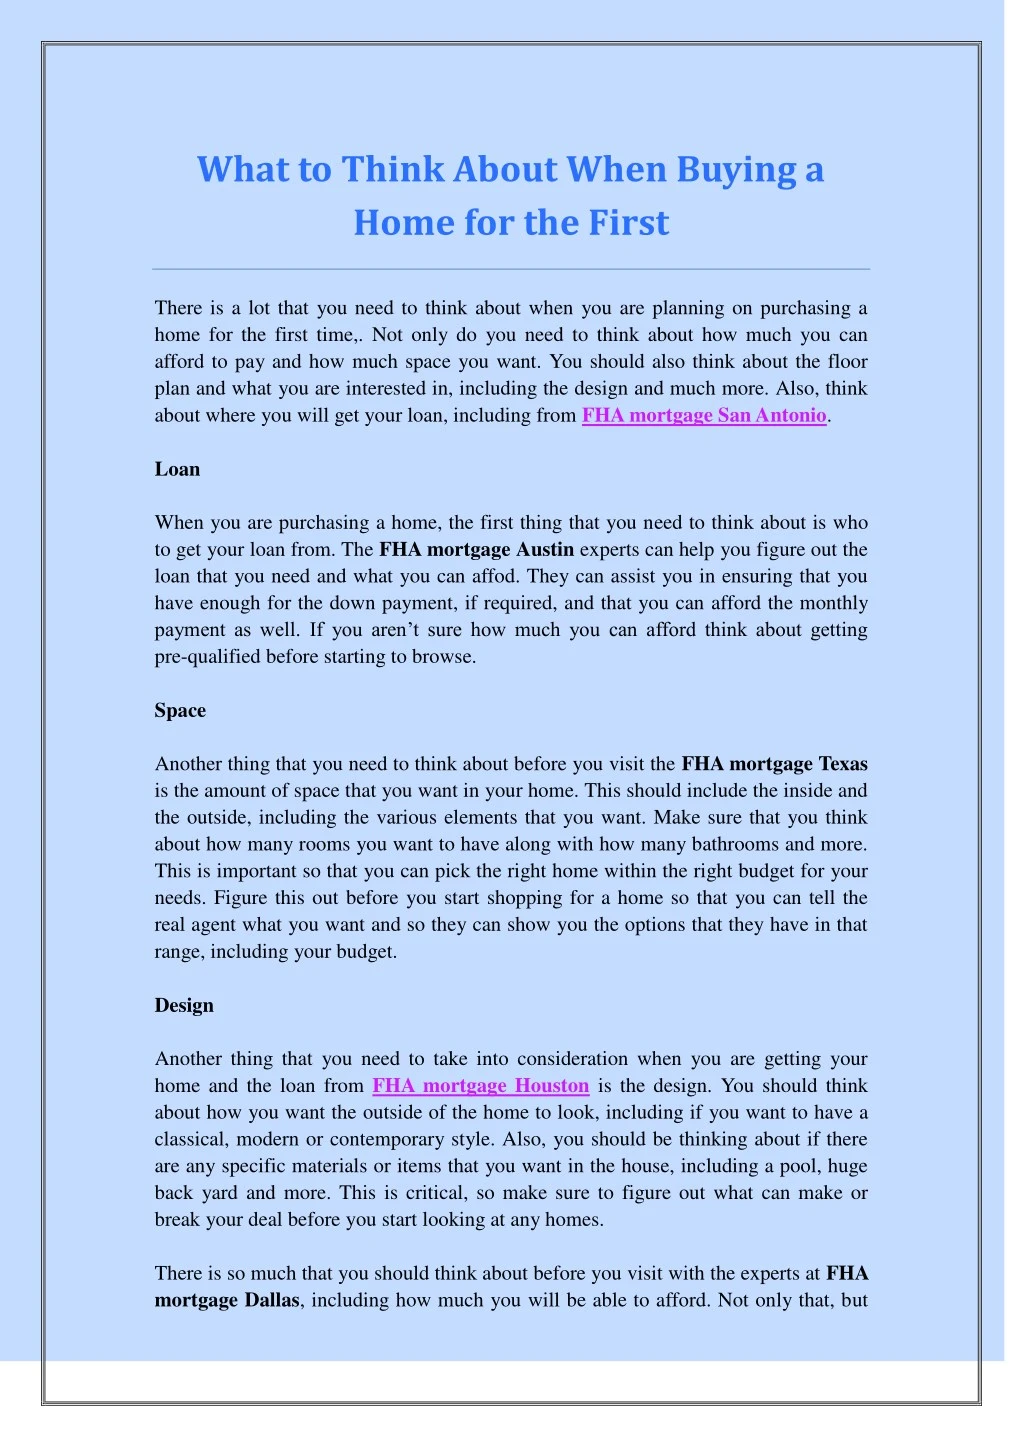 what to think about when buying a home